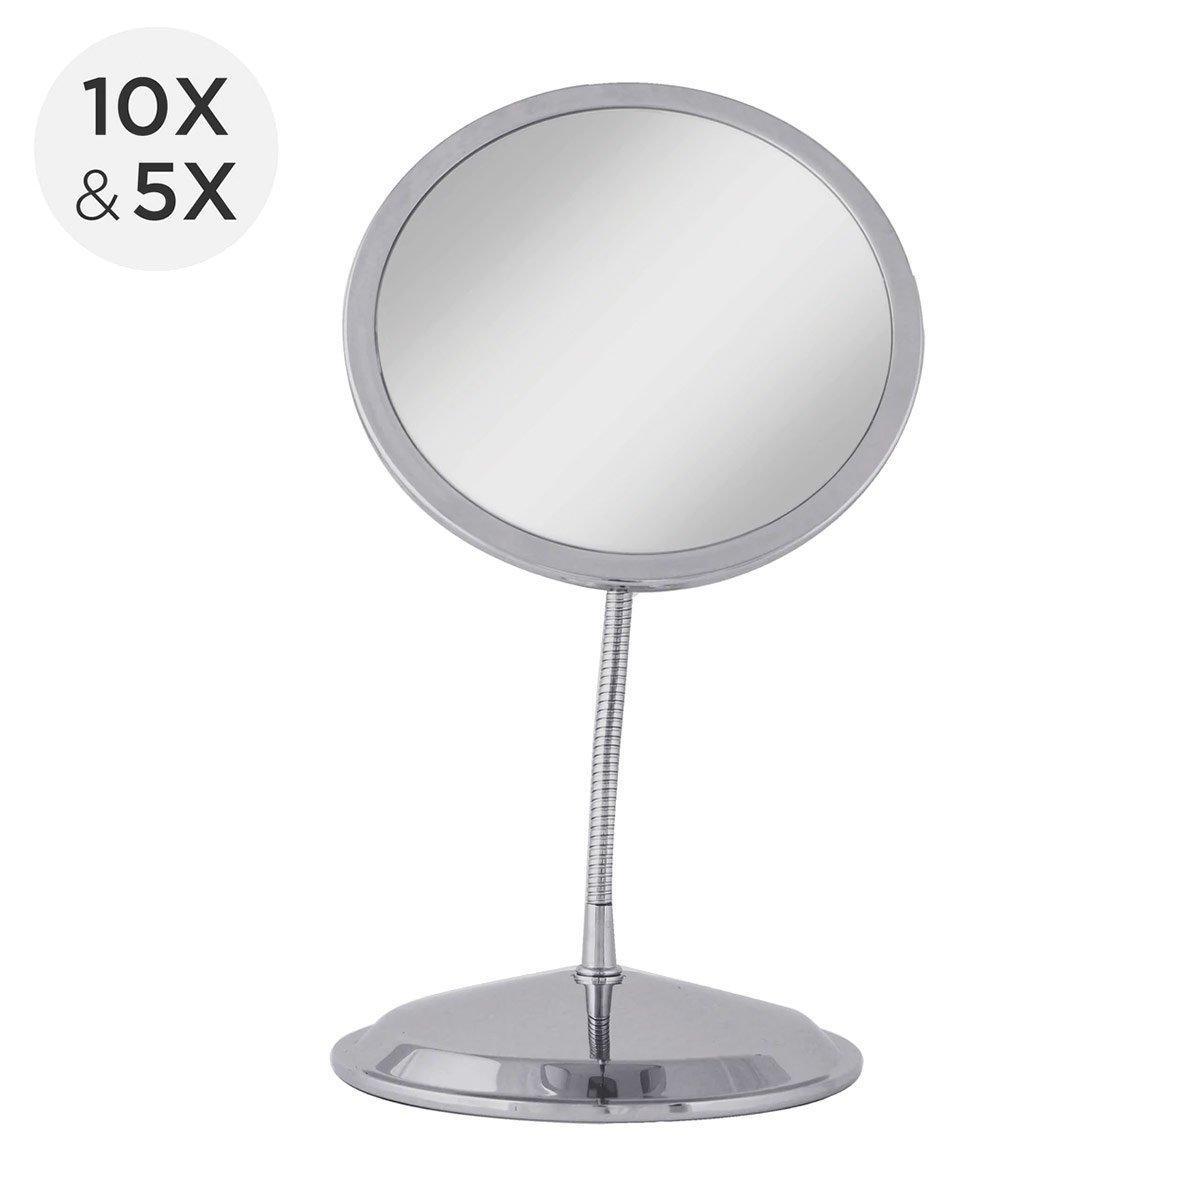 Vanity and Wall Mount Mirror 10x & 5x - The Low Vision Store